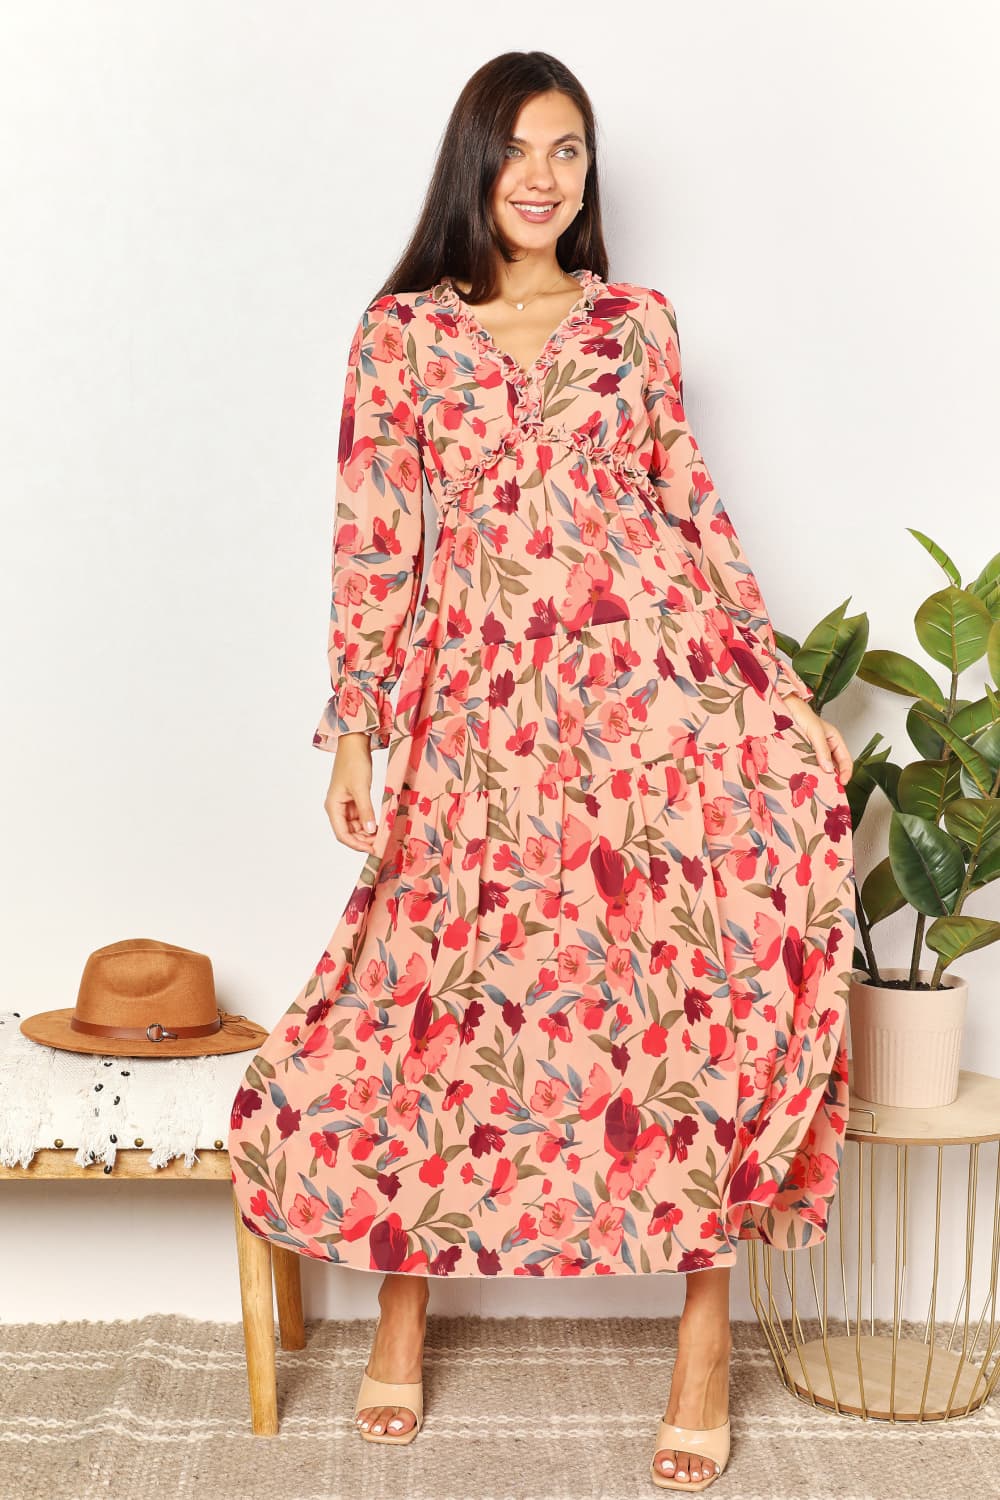 Red Floral Maxi Dress